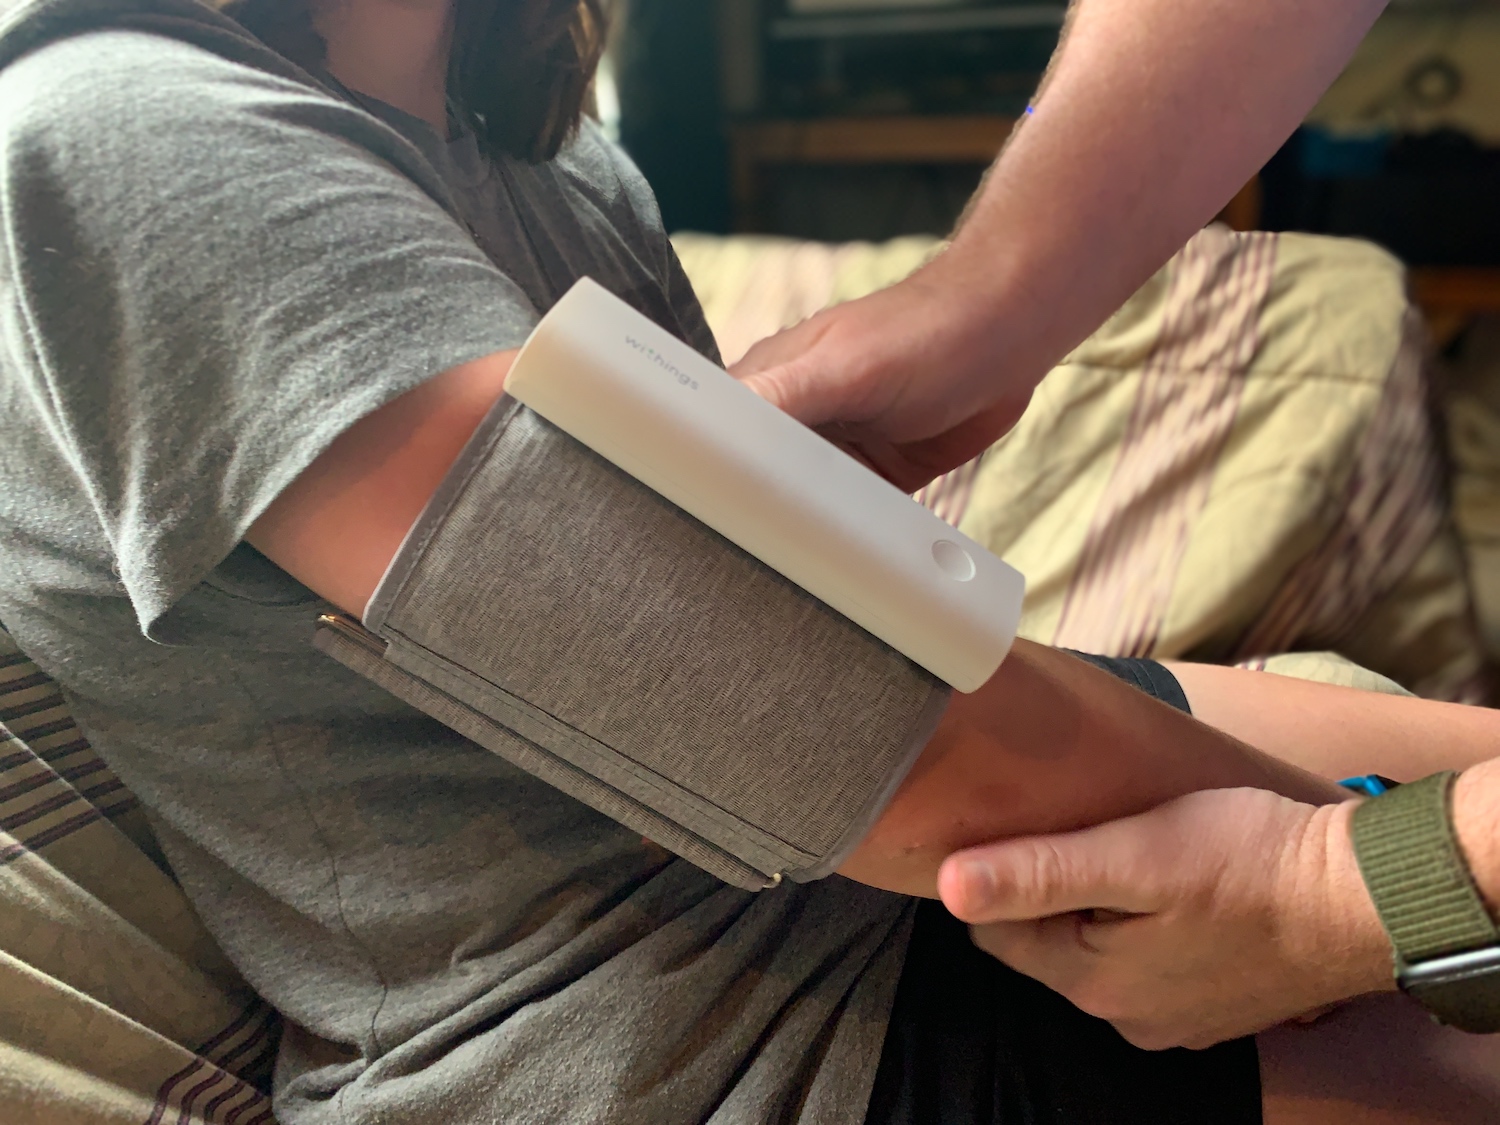 Withings Connect Review: Accurate Blood Pressure Monitoring In Seconds